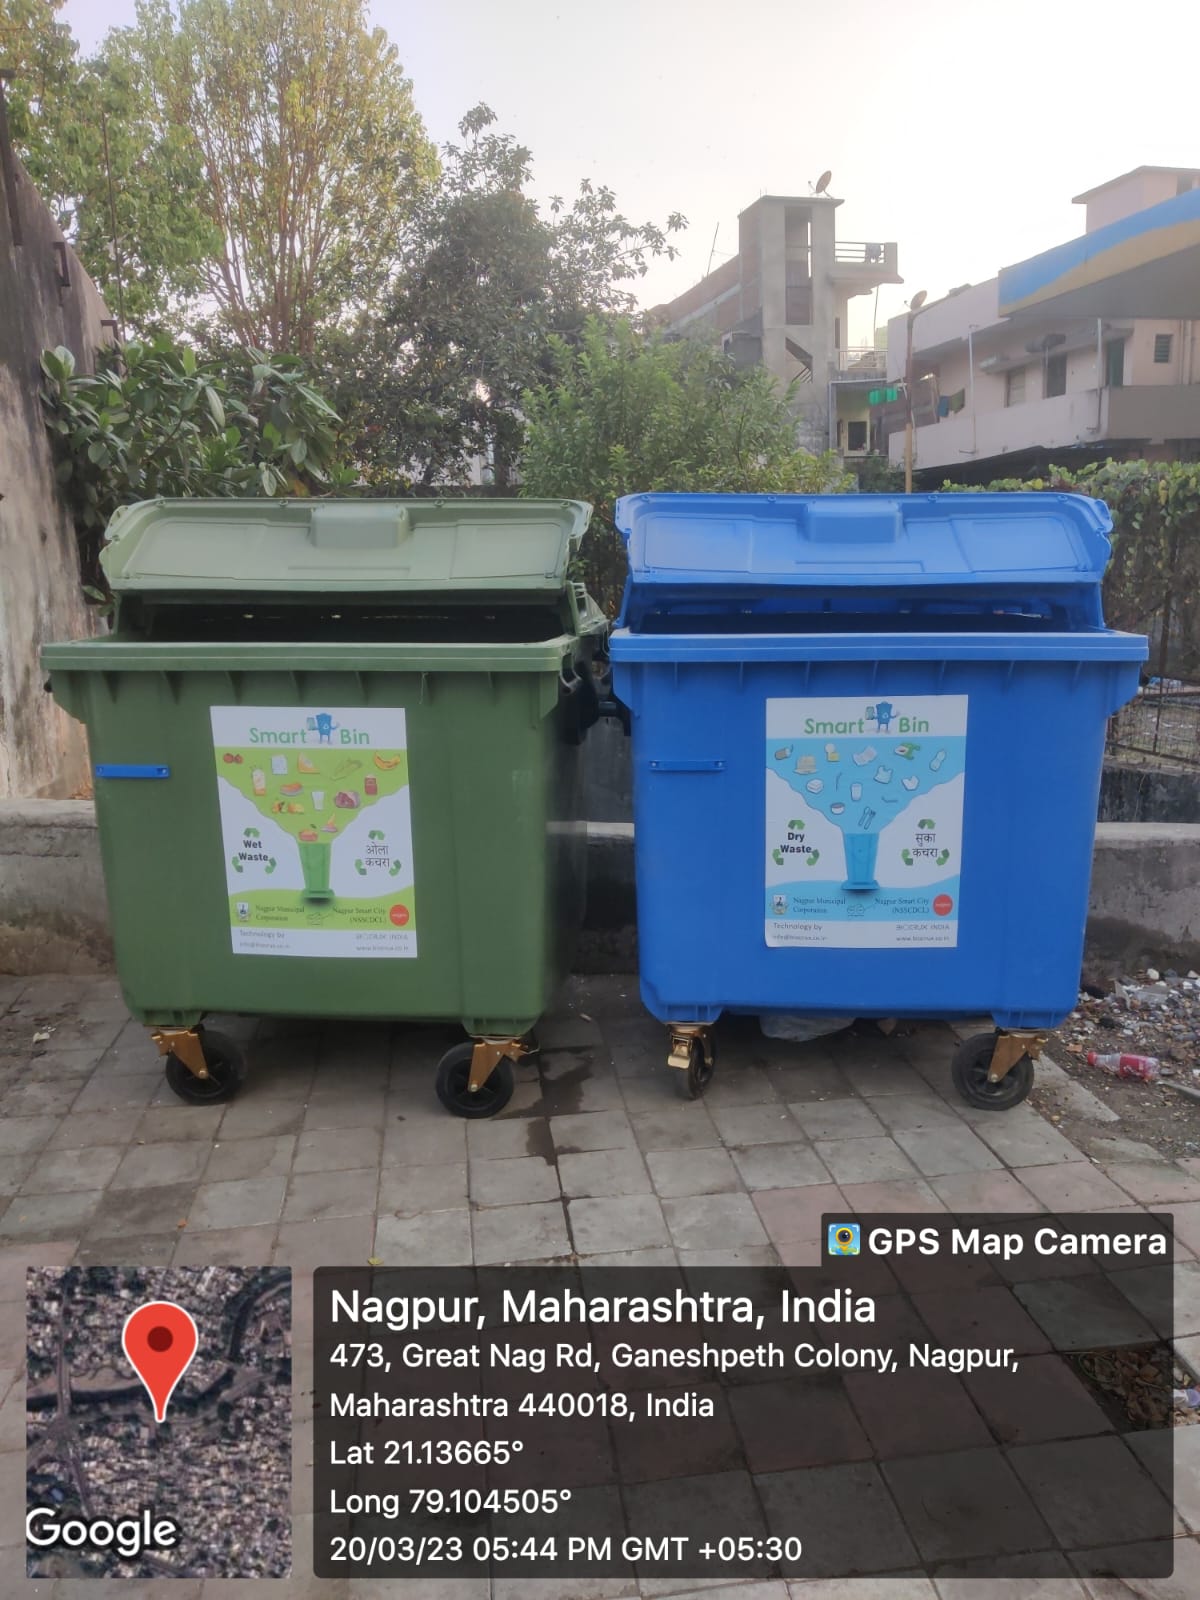 Smart bins with sensors installed at 175 spots in Nagpur - The